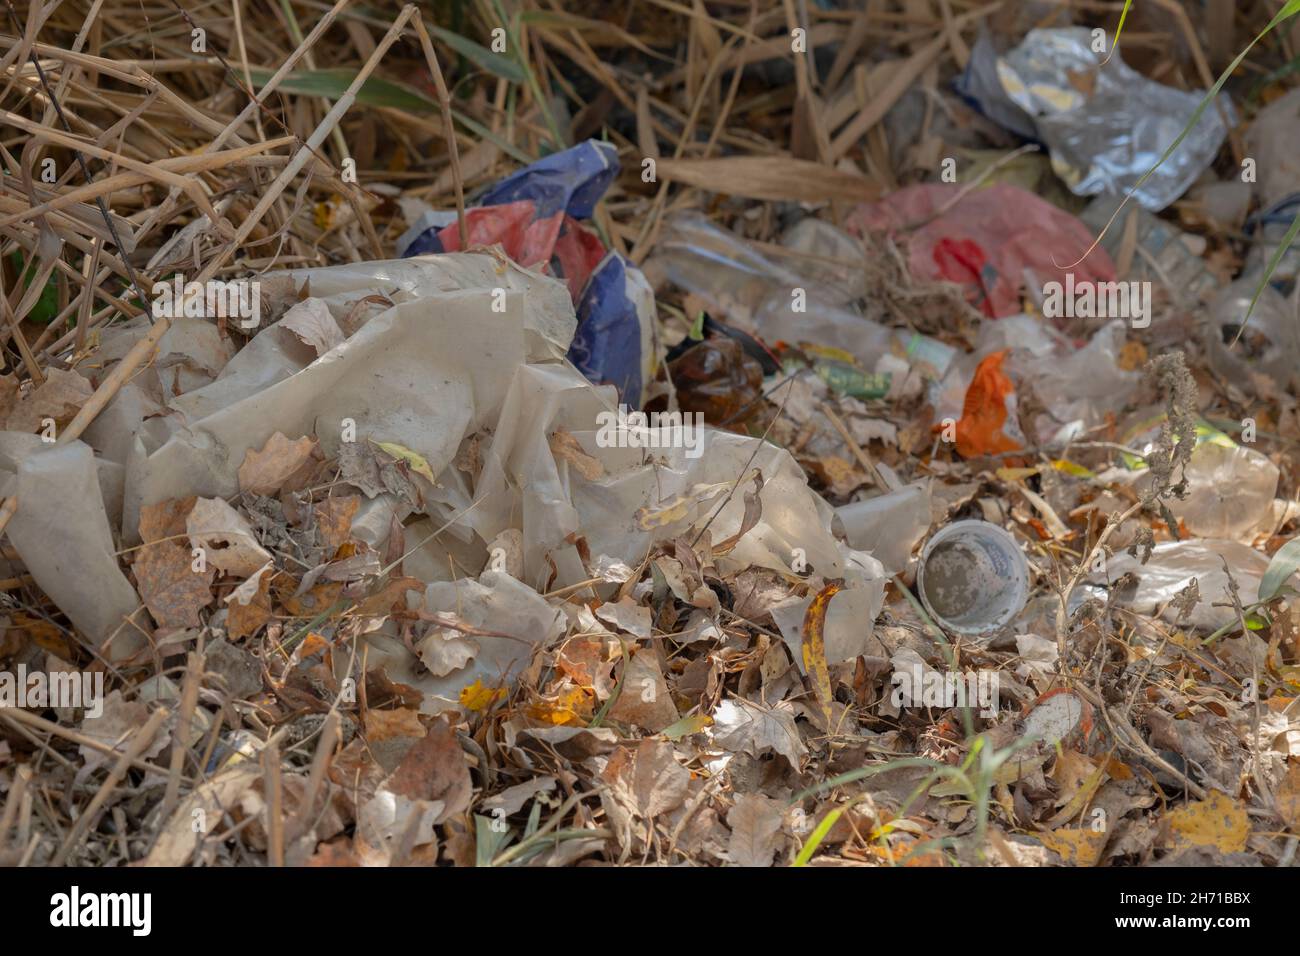 Discarded plastic bottles and other garbage in a meadow in the shore zone Stock Photo